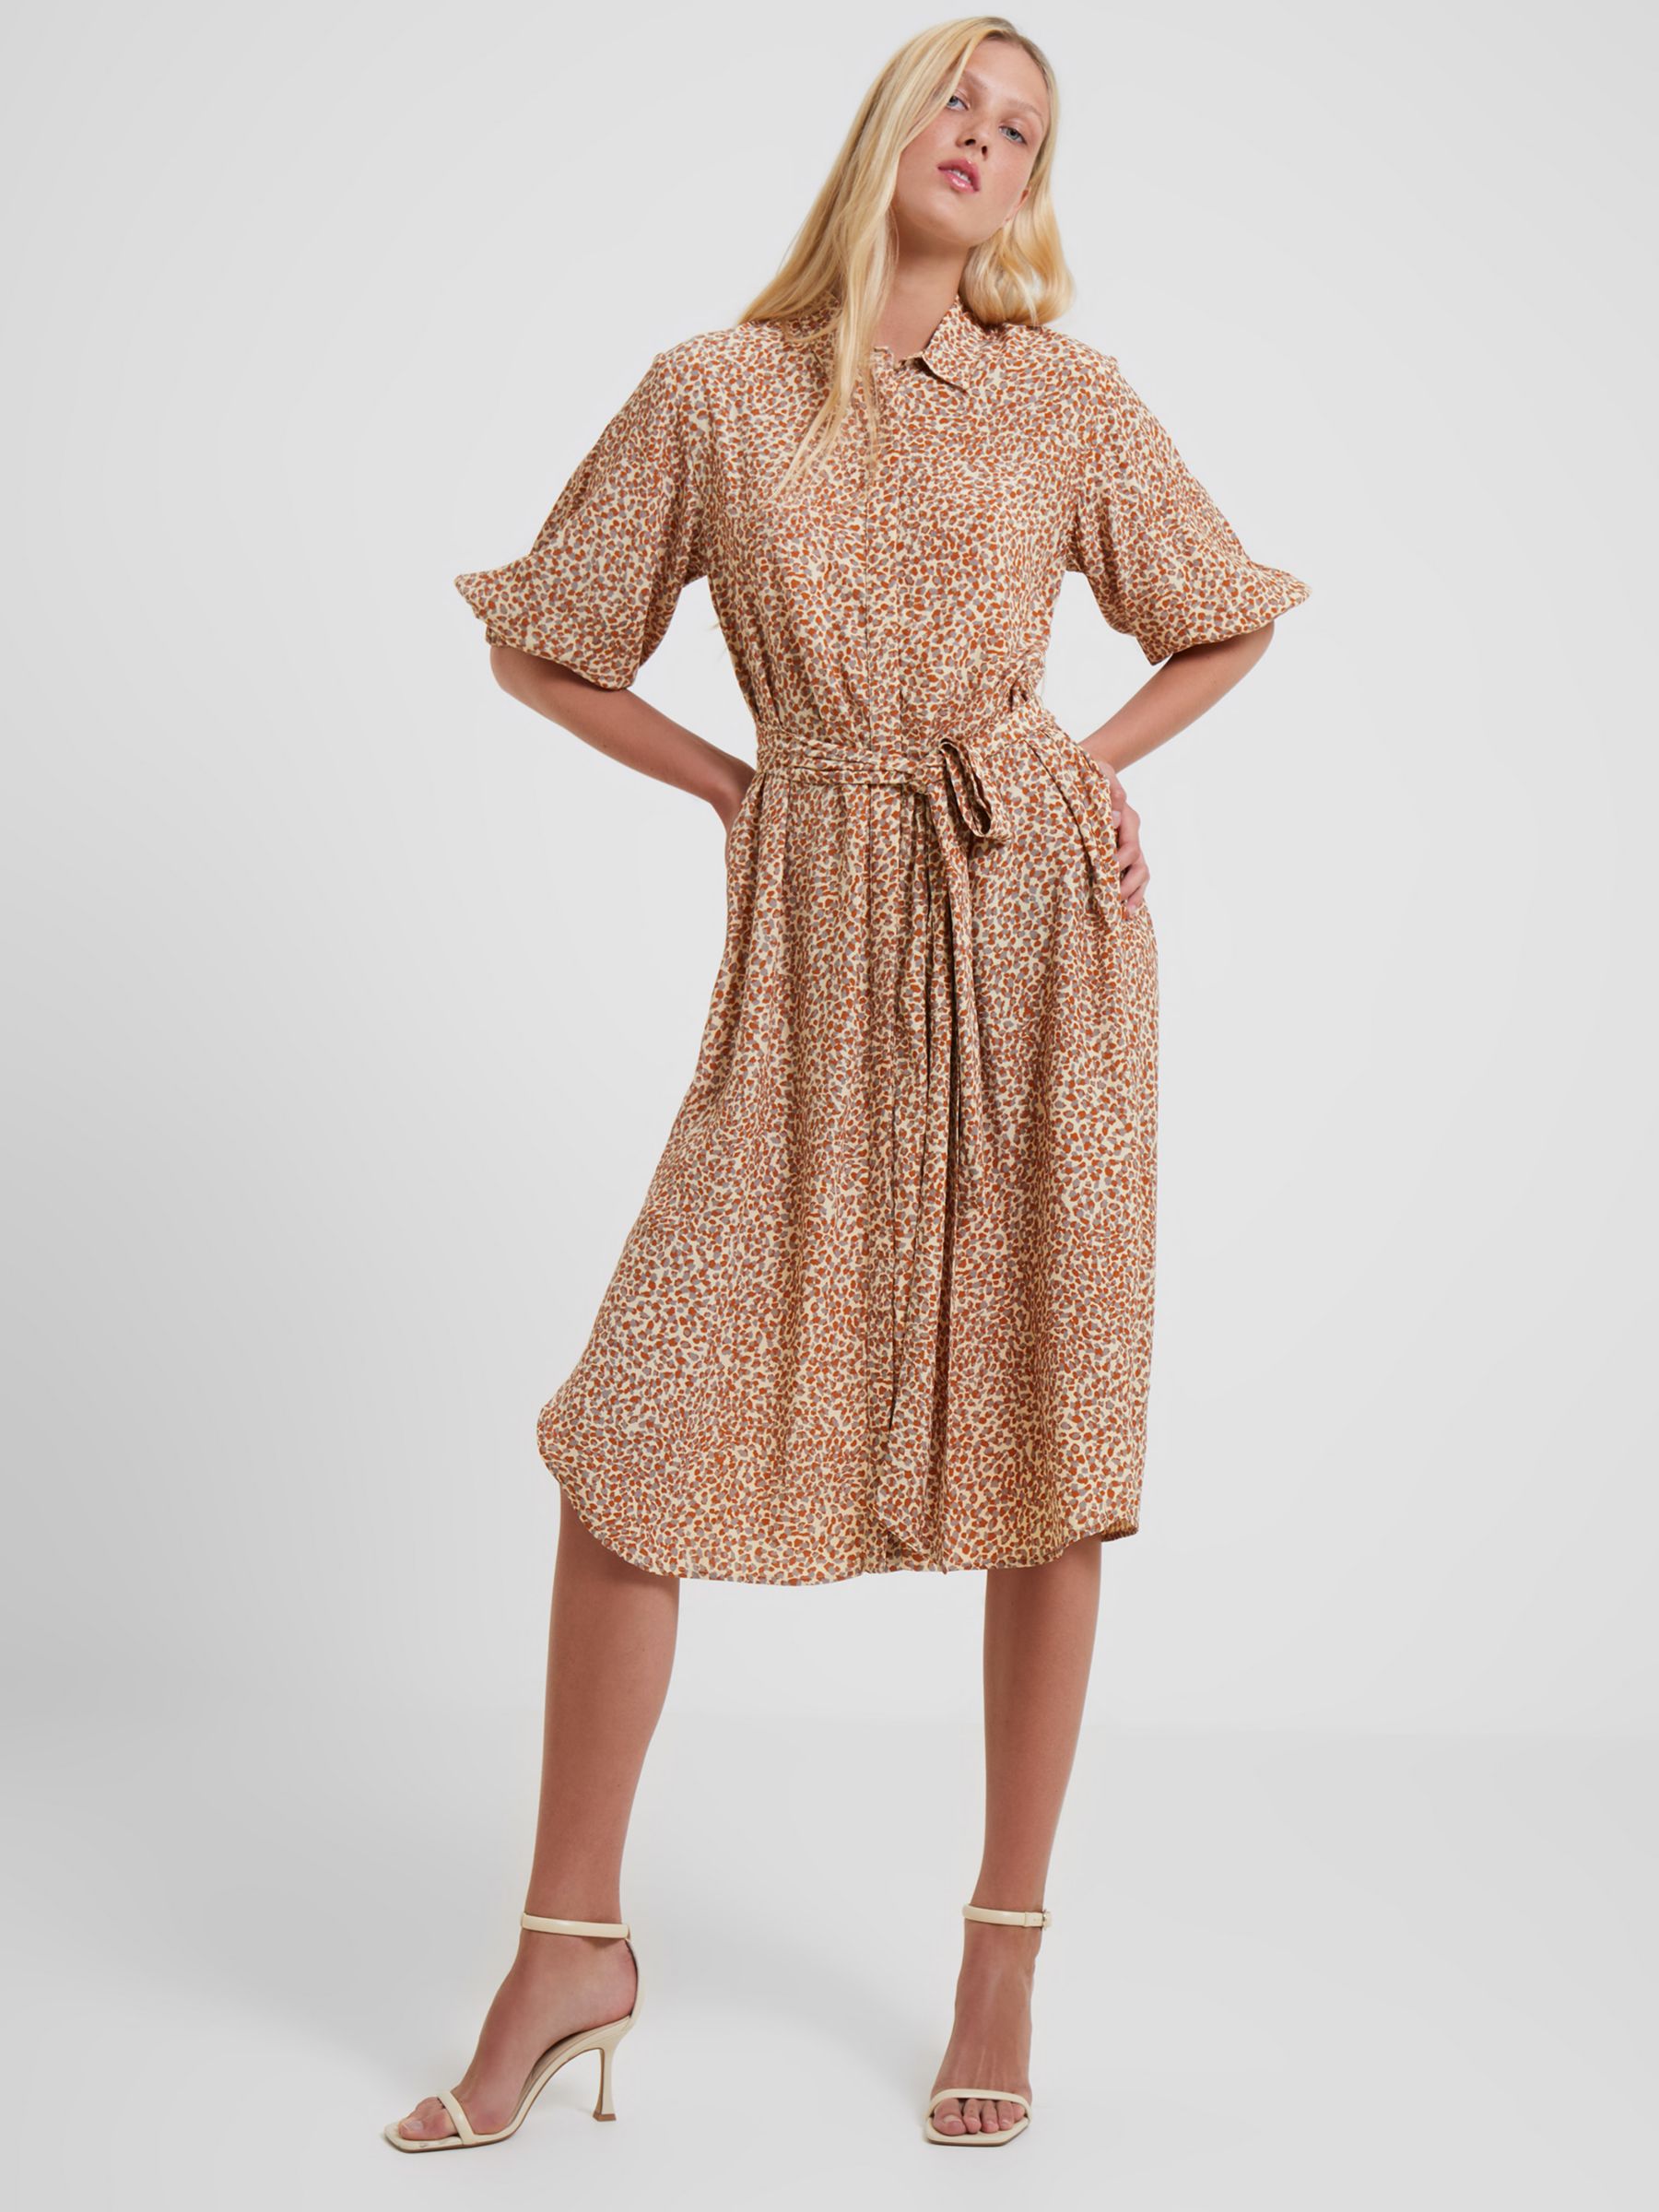 French Connection Cadie Delph Drape Shirt Dress, Shifting Sand, S